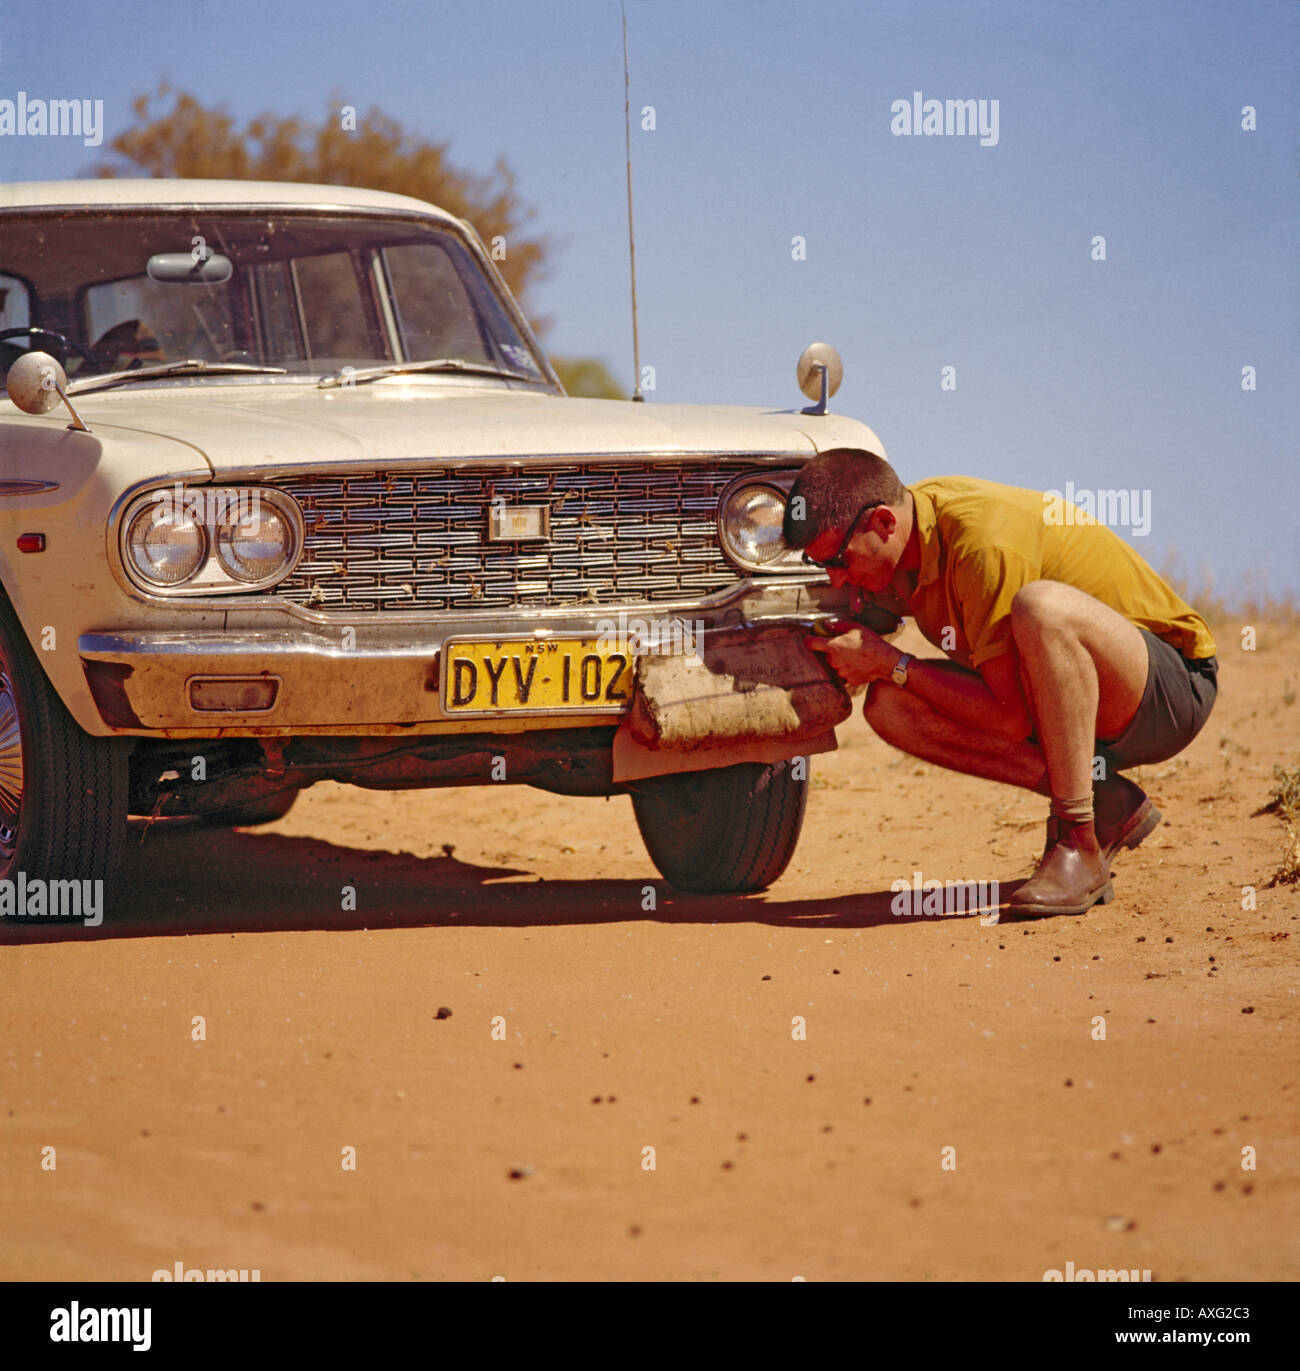 Driver drinking water from a waterbag cooled by slow evaporation and hanging from bumper of Toyota Crown Auto Australian outback Stock Photo